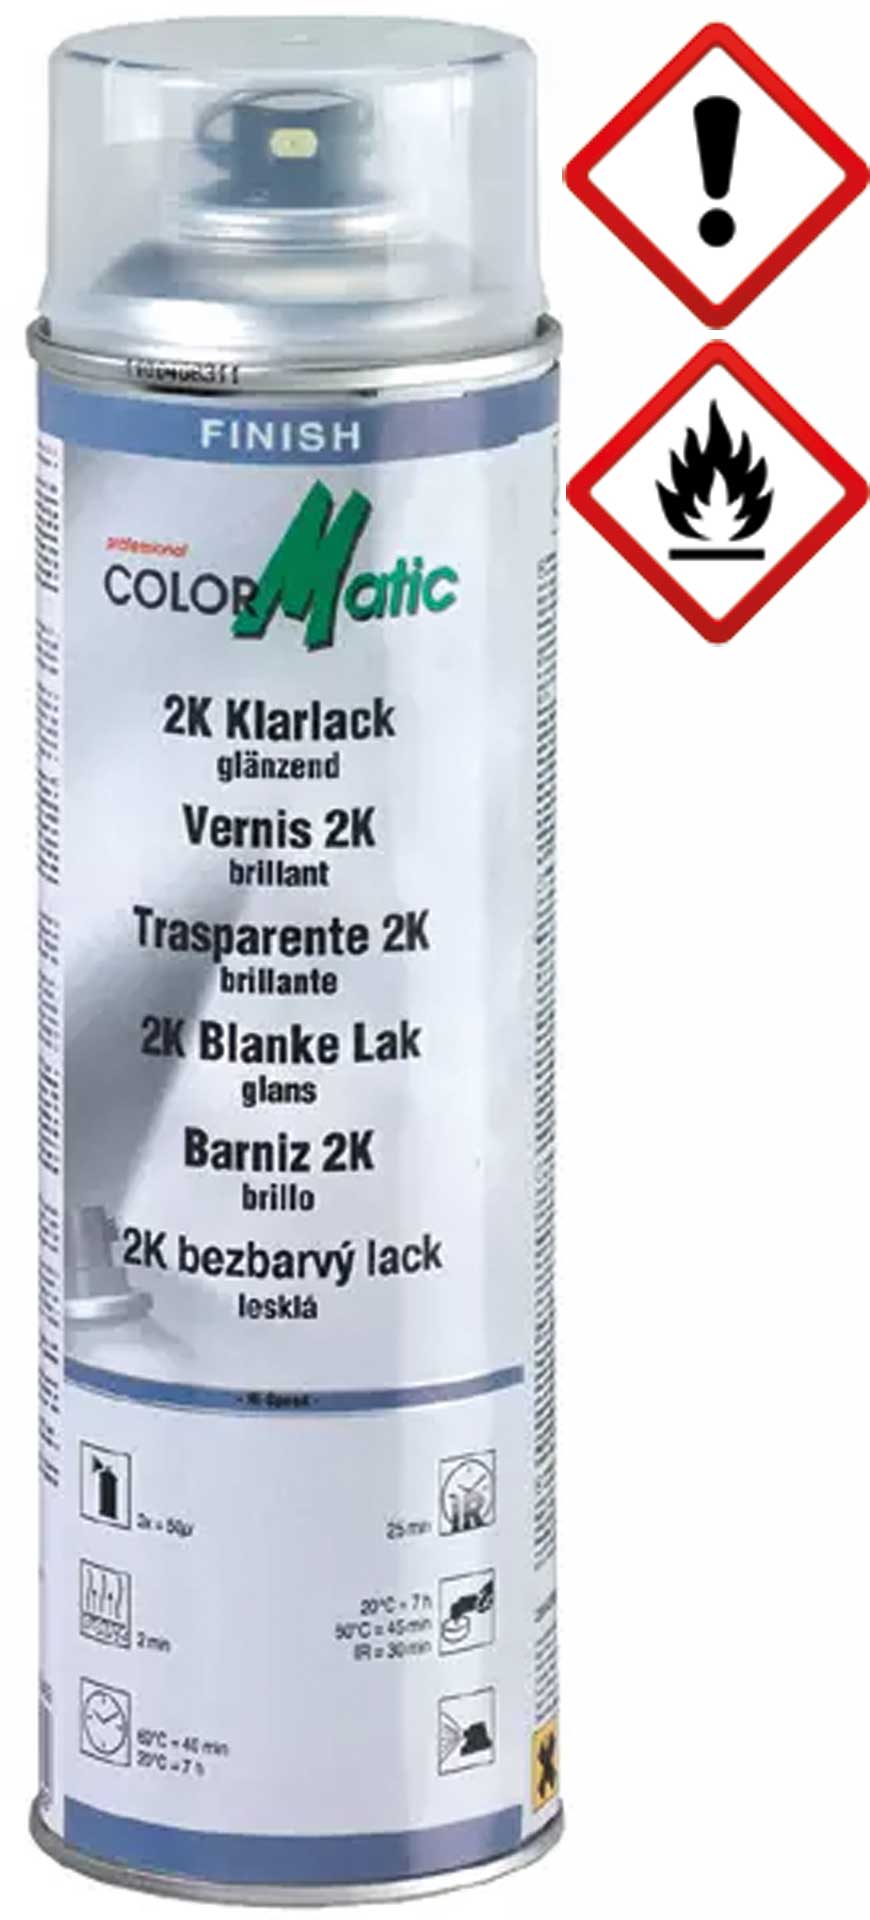 COLORMATIC 2K CLEAR VARNISH GLOSSY 200ML